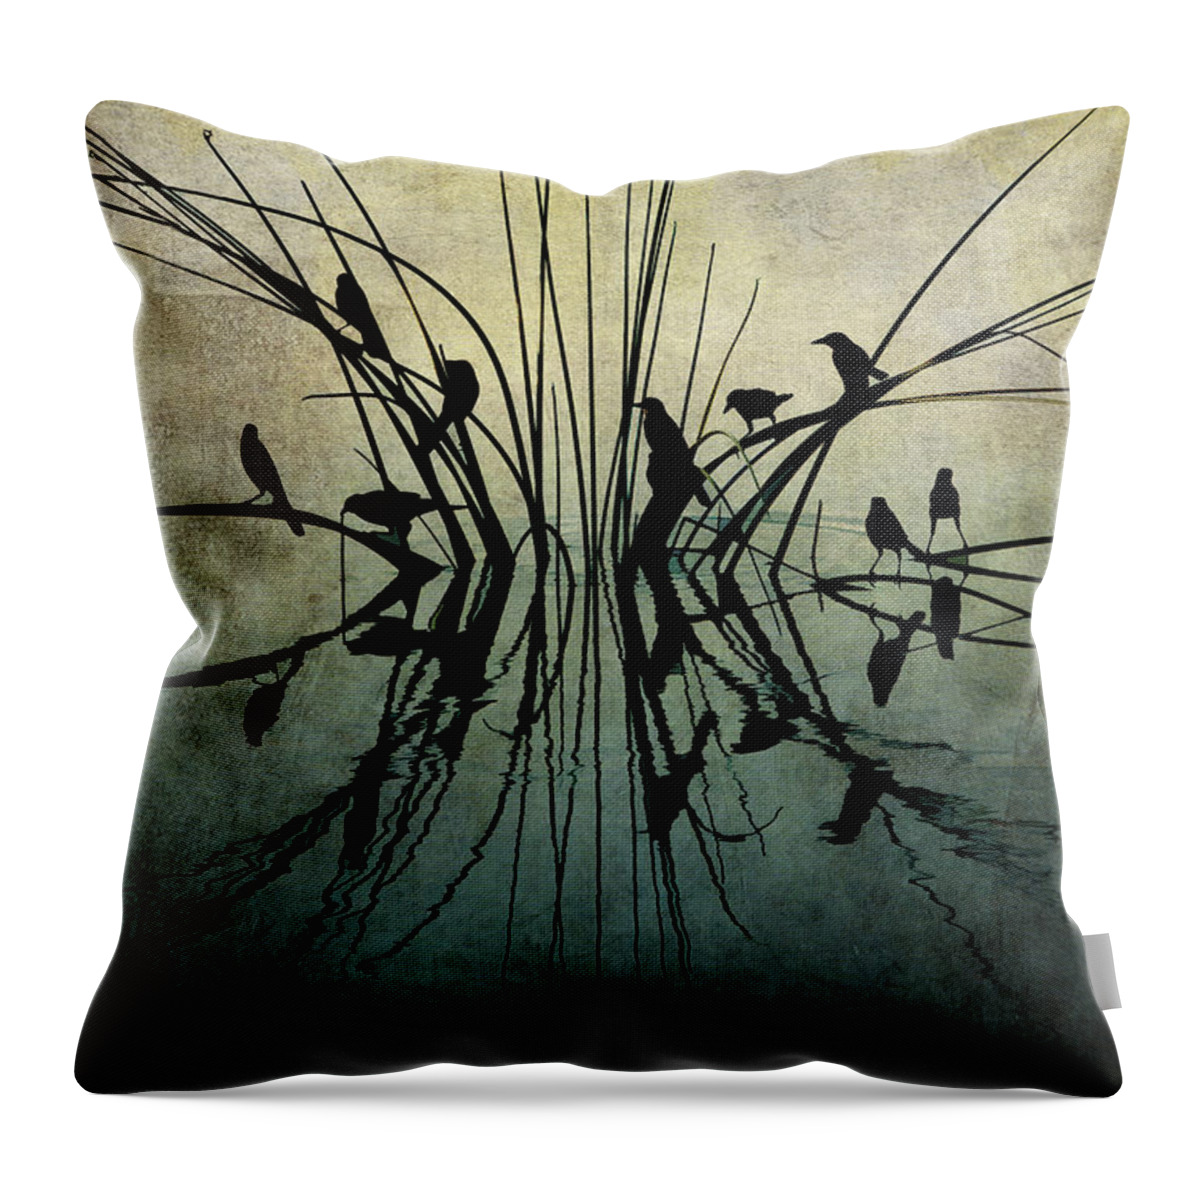 Lake Side Setting With An Old Grunge Mood Throw Pillow featuring the photograph Reflective Grunge by Pete Rems